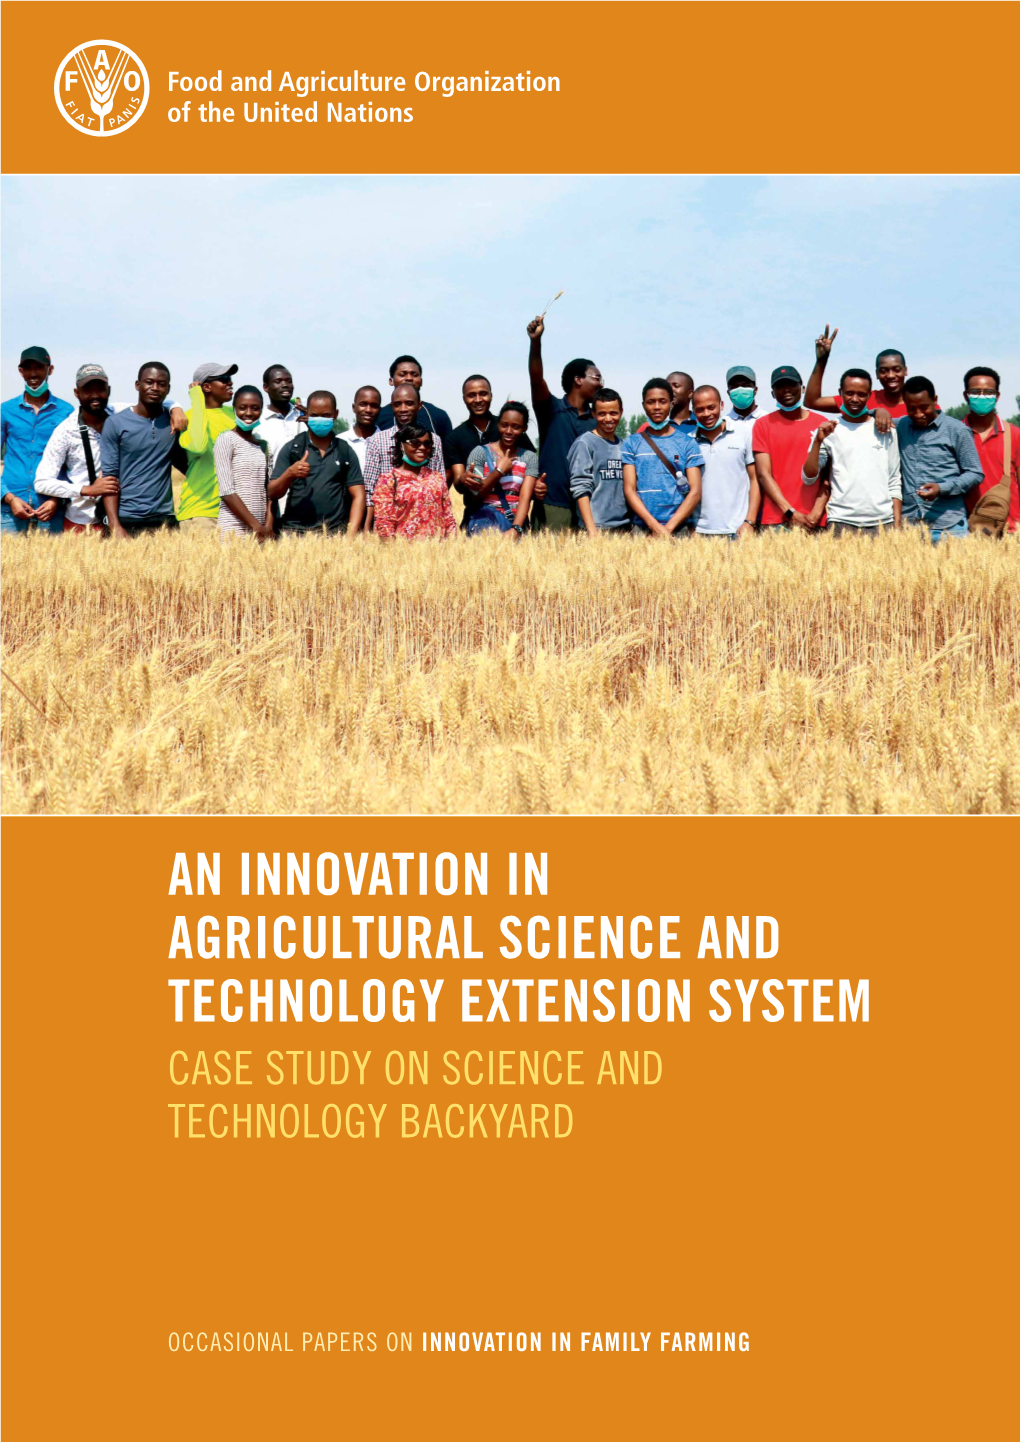 An Innovation in Agricultural Science and Technology Extension System Case Study on Science and Technology Backyard